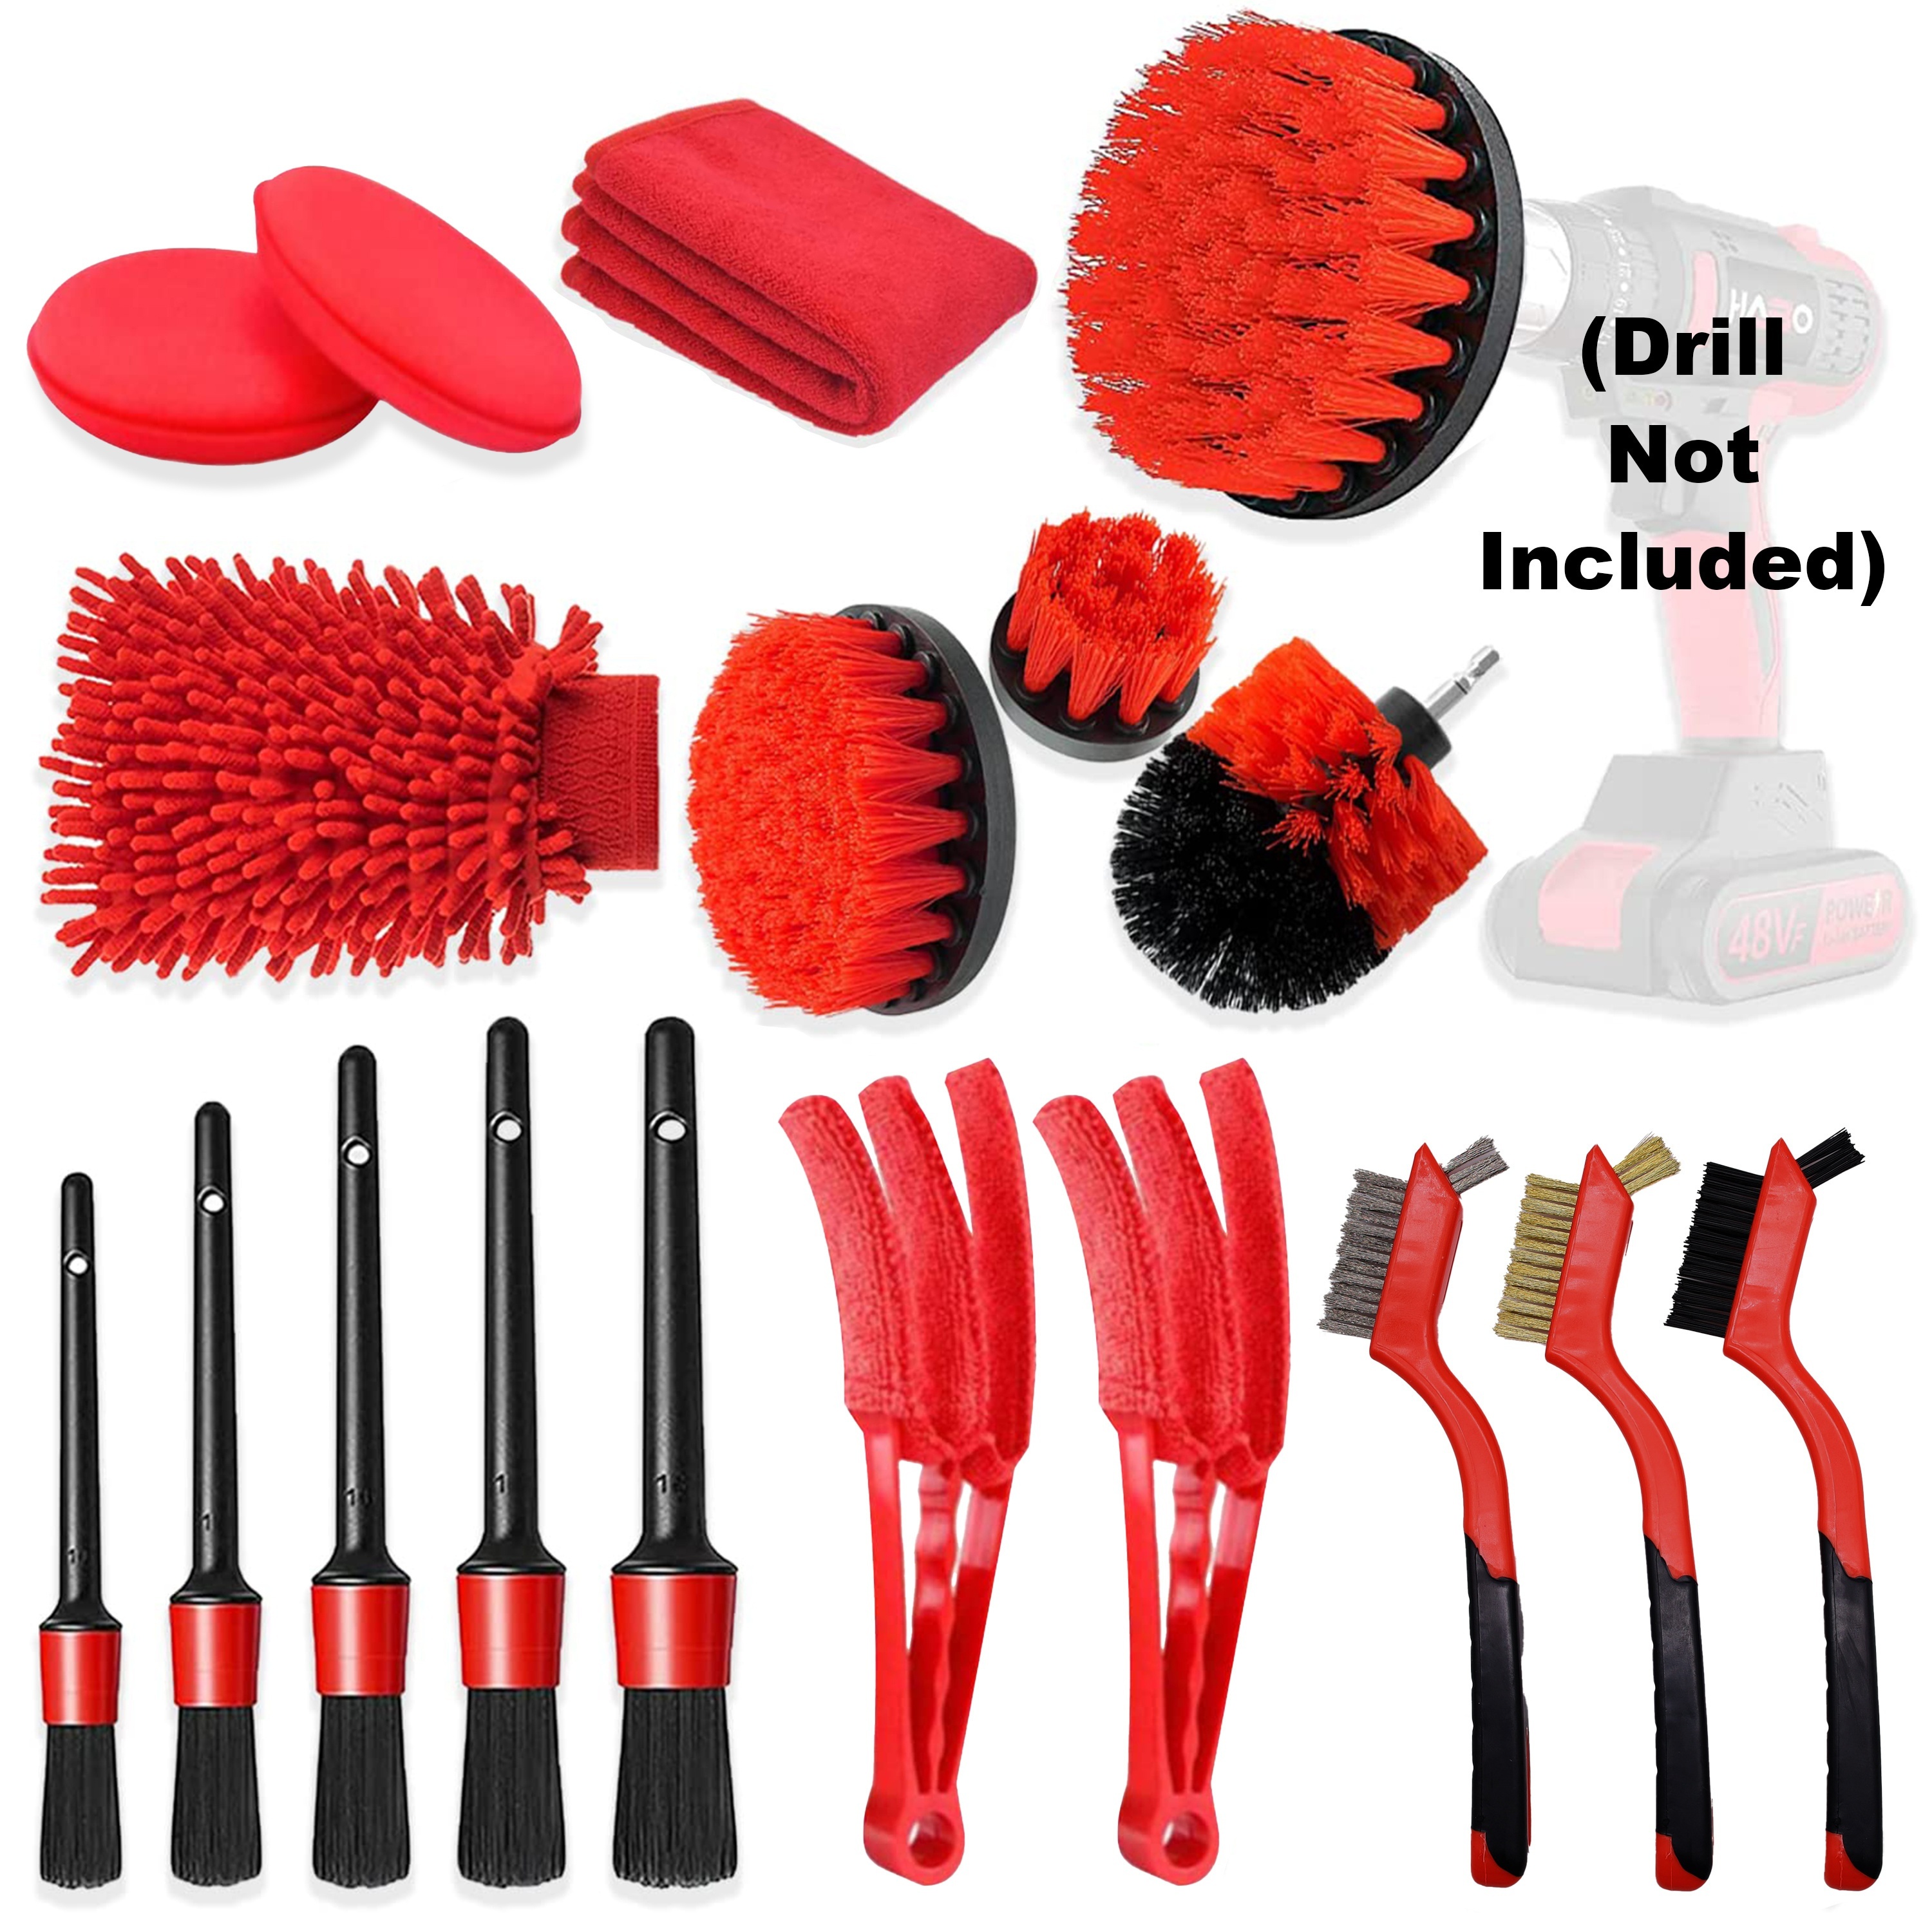 Car Detailing Kit Interior Cleaner, 17Pcs Car Cleaning Supplies with High  Power Portable Car Vacuum, Detailing Brush Set, Windshield Cleaner,  Complete